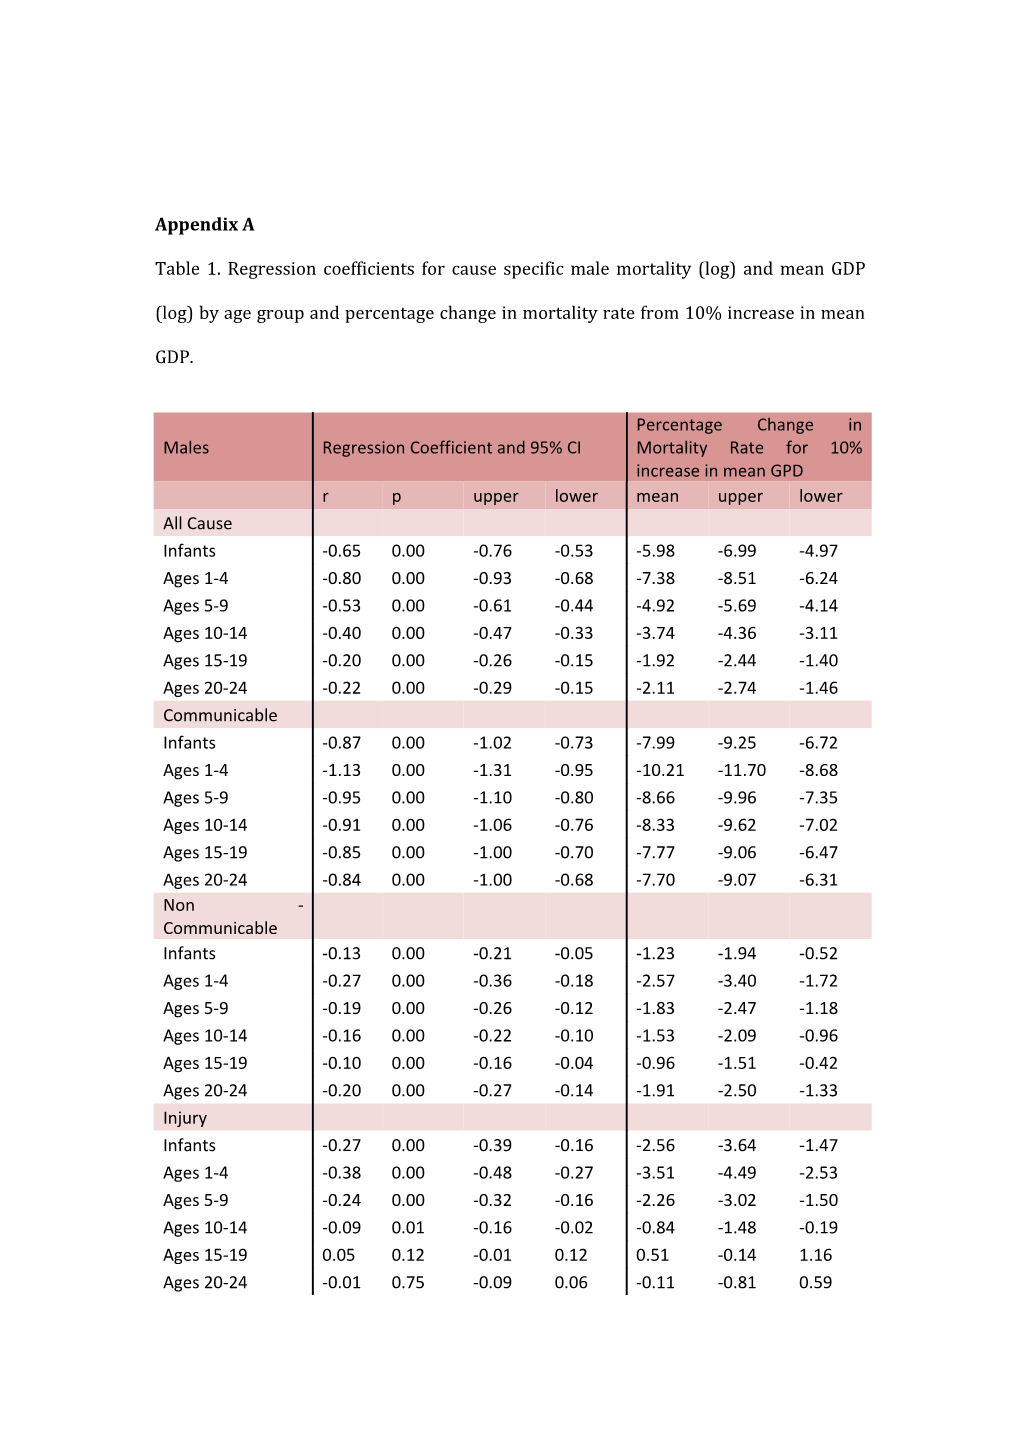 Table 1. Regression Coefficients for Cause Specific Male Mortality (Log) and Mean GDP (Log)